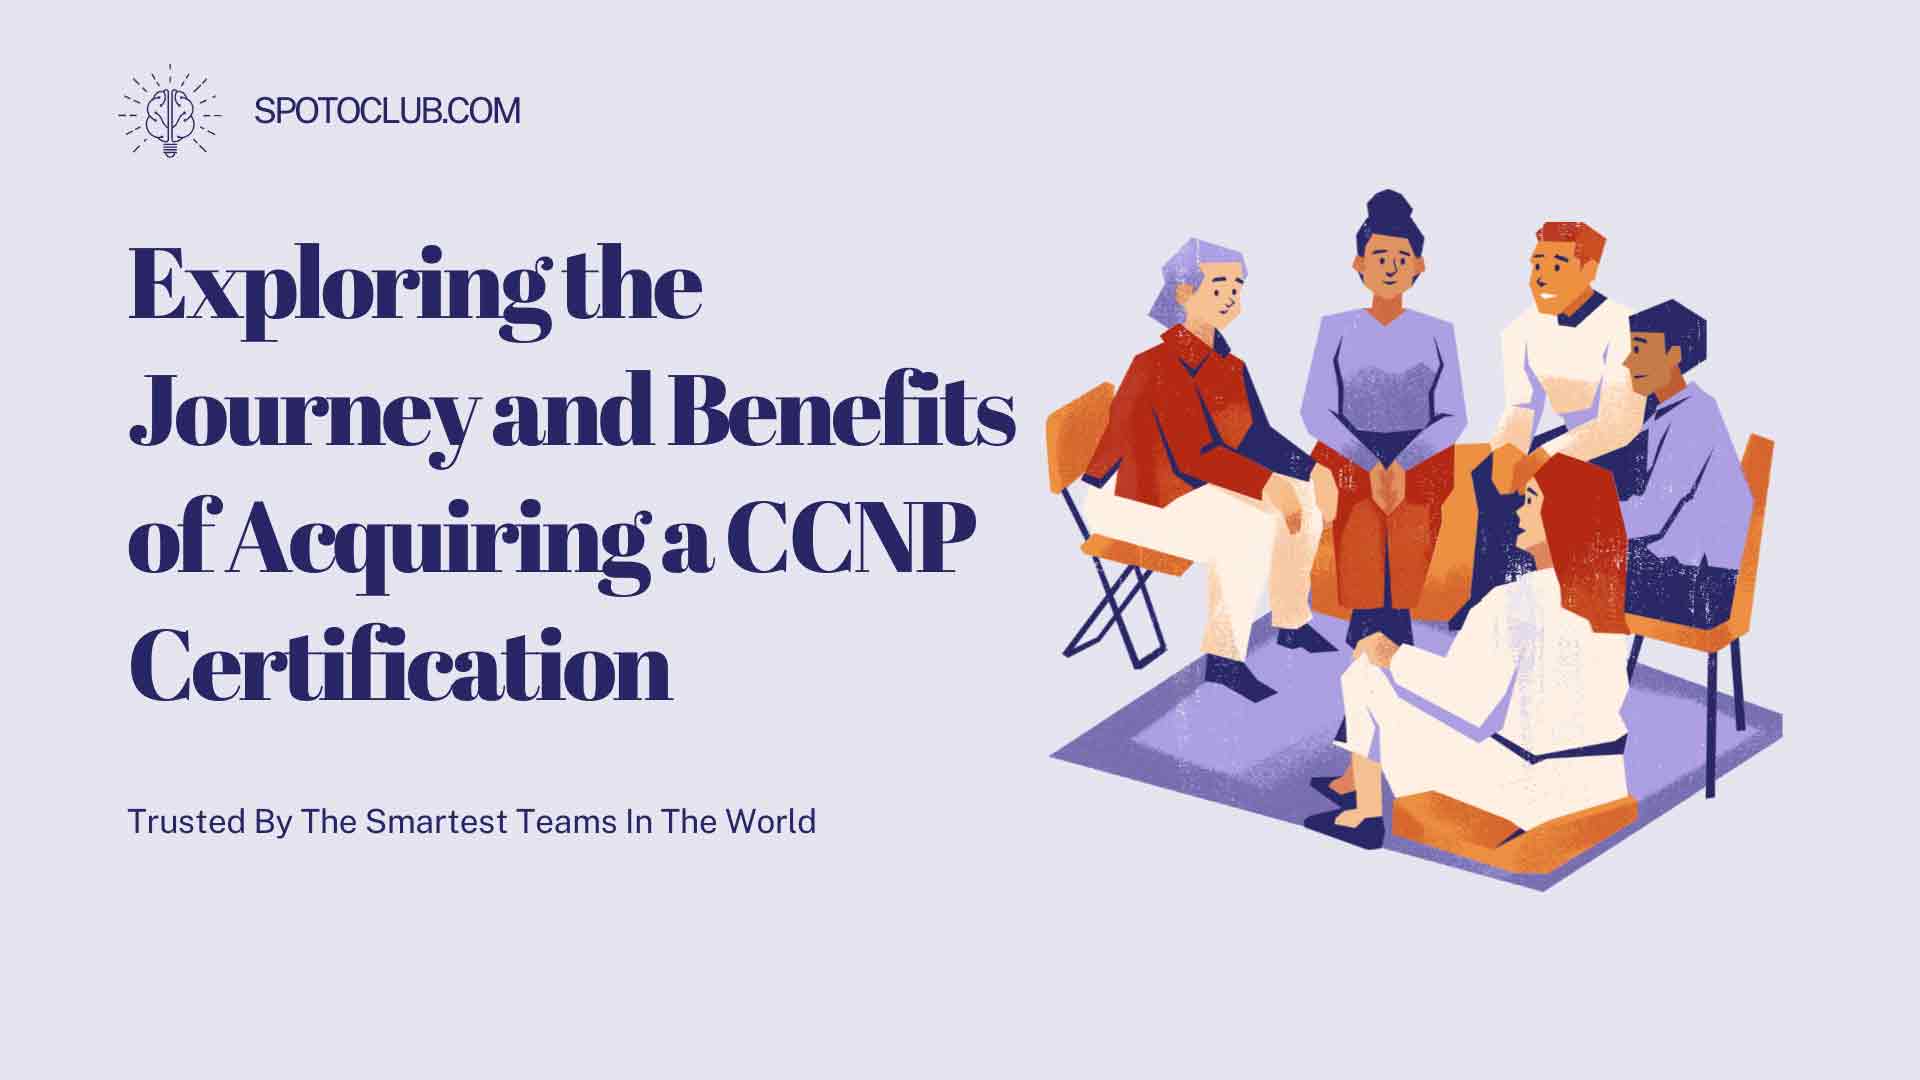 Exploring the Journey and Benefits of Acquiring a CCNP Certification